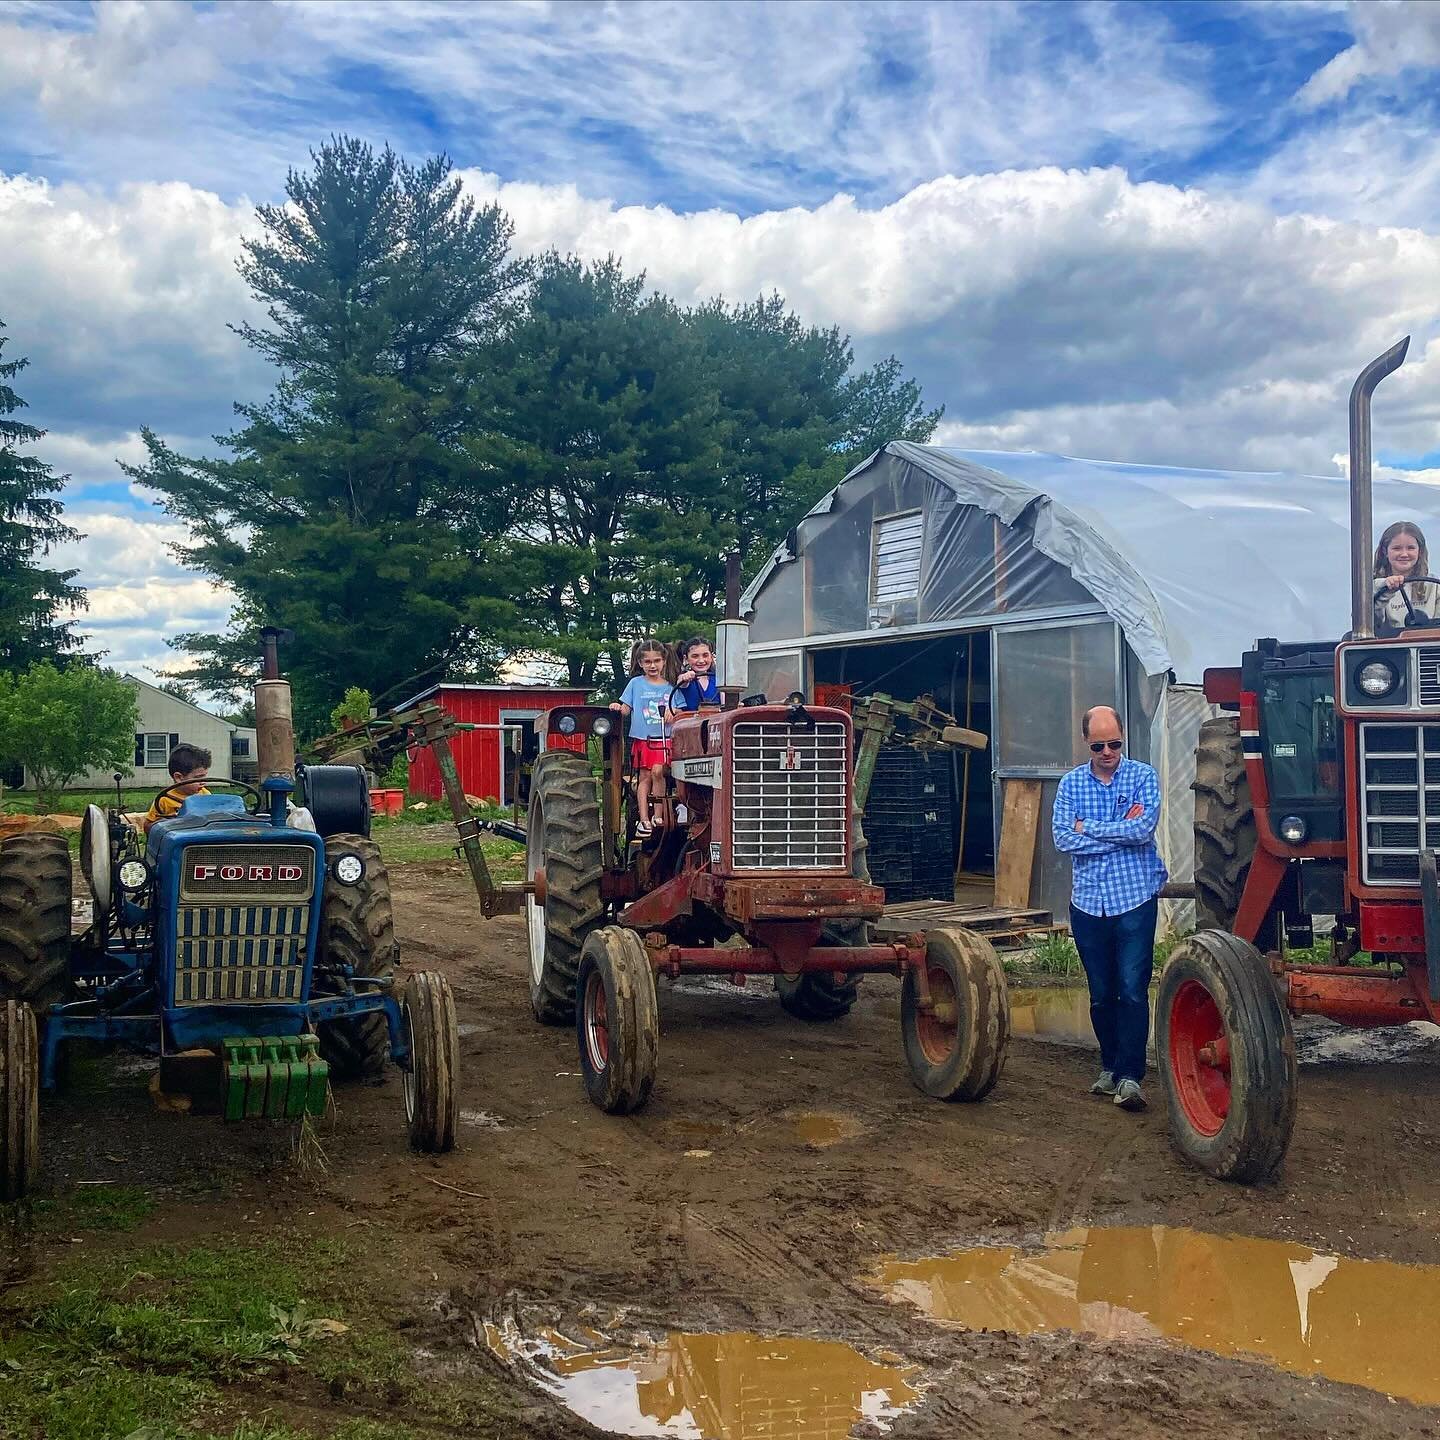 Open house was a smash hit. UPick strawberries gonna be on a new level. We drove tractors, splashed in the mud, got a guest visit from the Chester county farmer of the year @birchrunhills , the baker of the year in any county @ursabakery and we even 